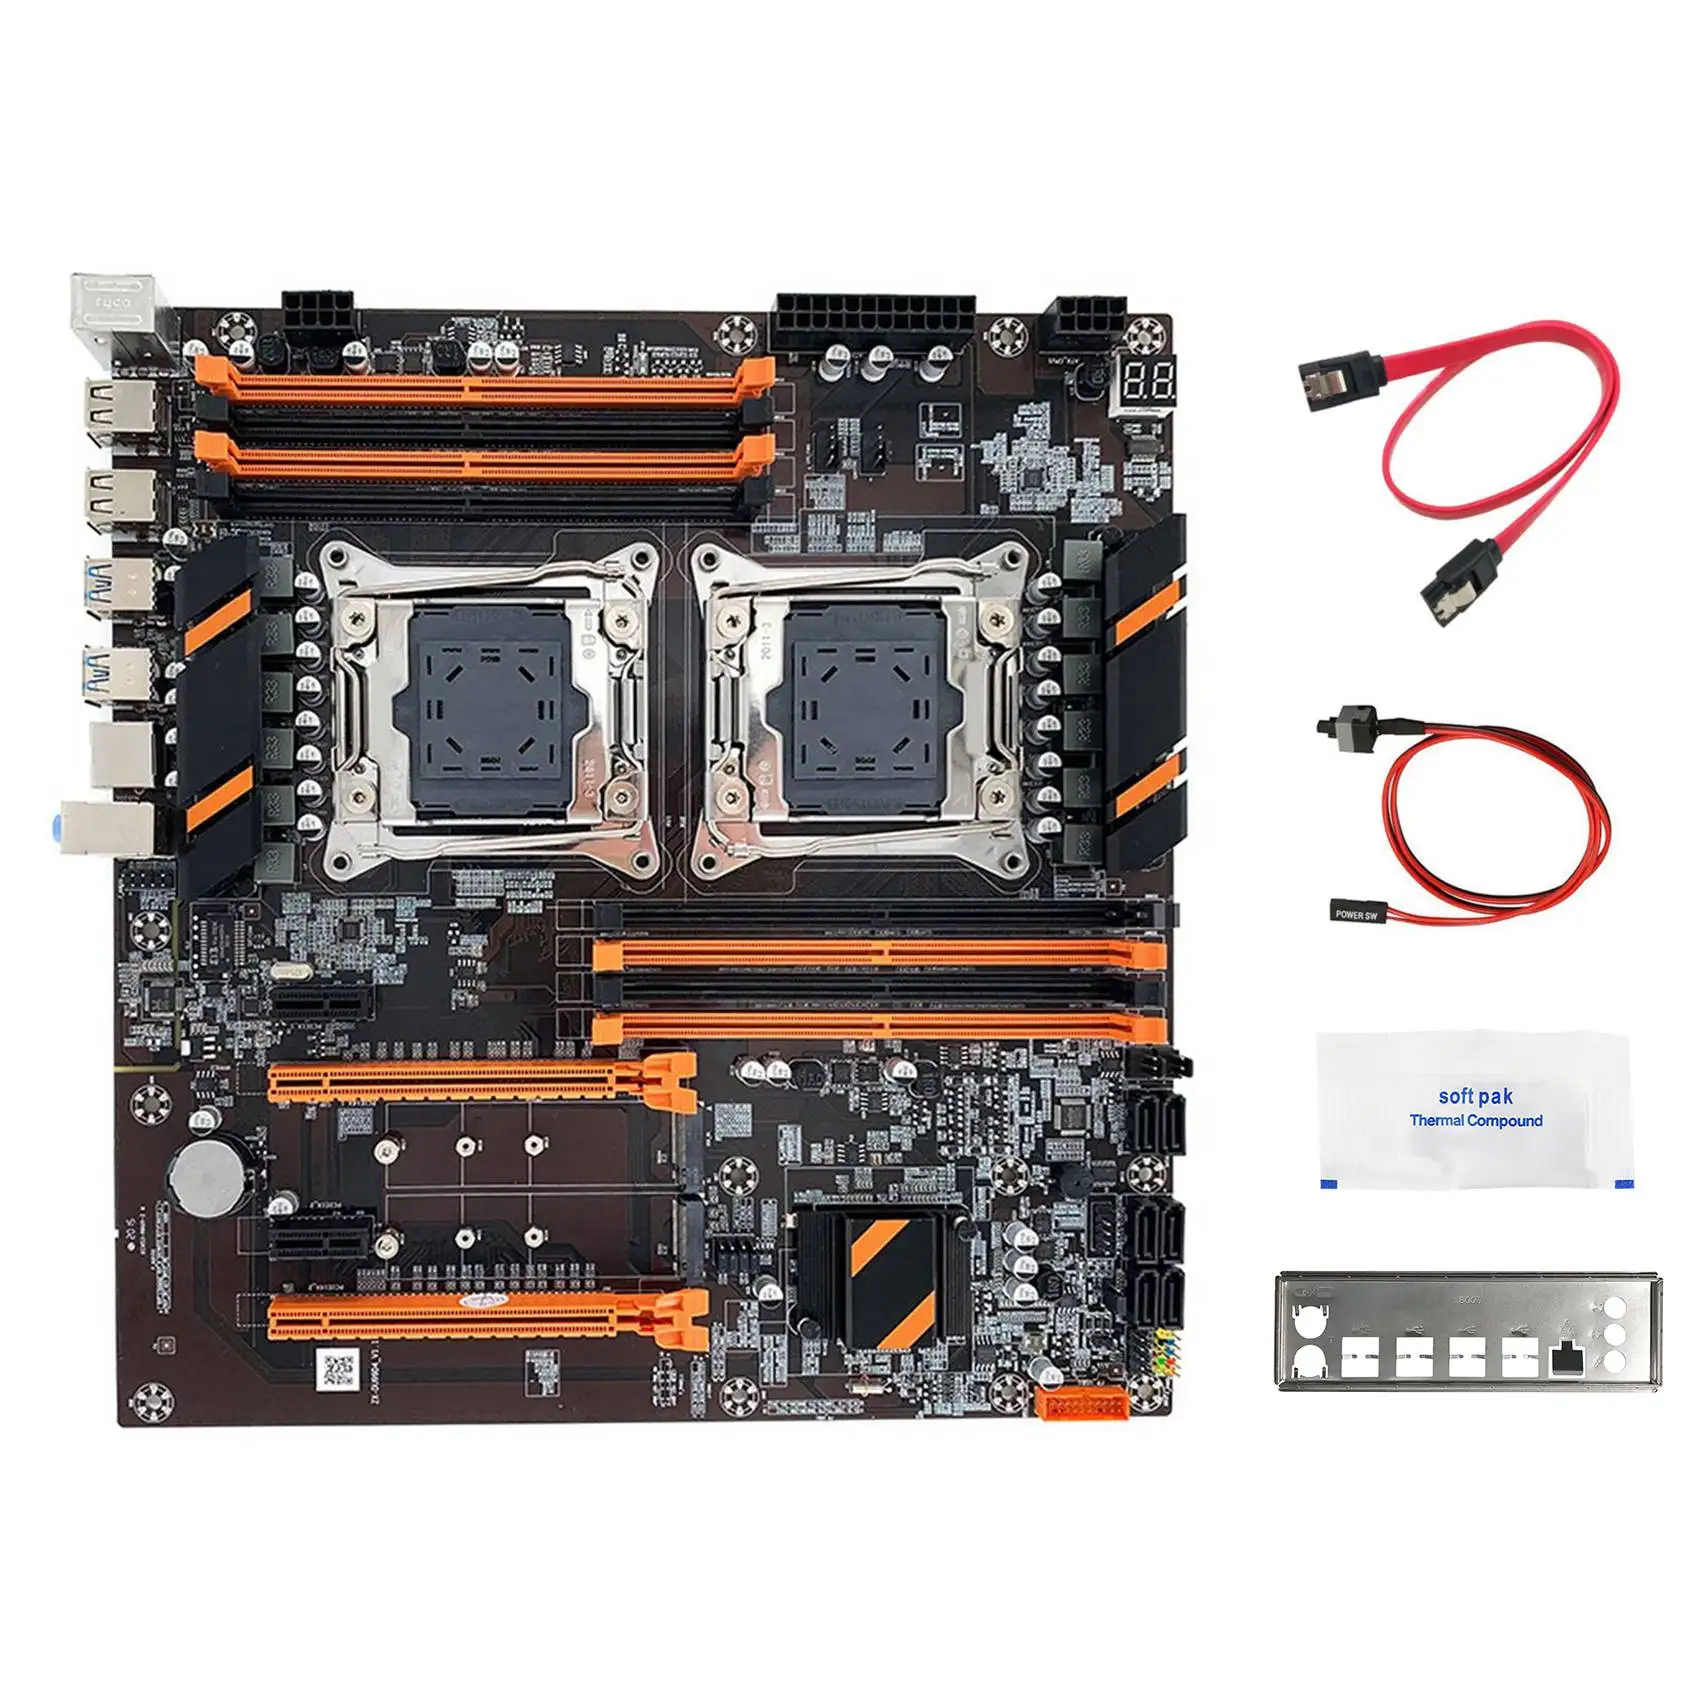 

X99 Dual CPU Motherboard+SATA Cable+Switch Cable+Baffle+Thermal Grease LGA 2011 DDR4 Support 2011-V3 CPU Motherboard